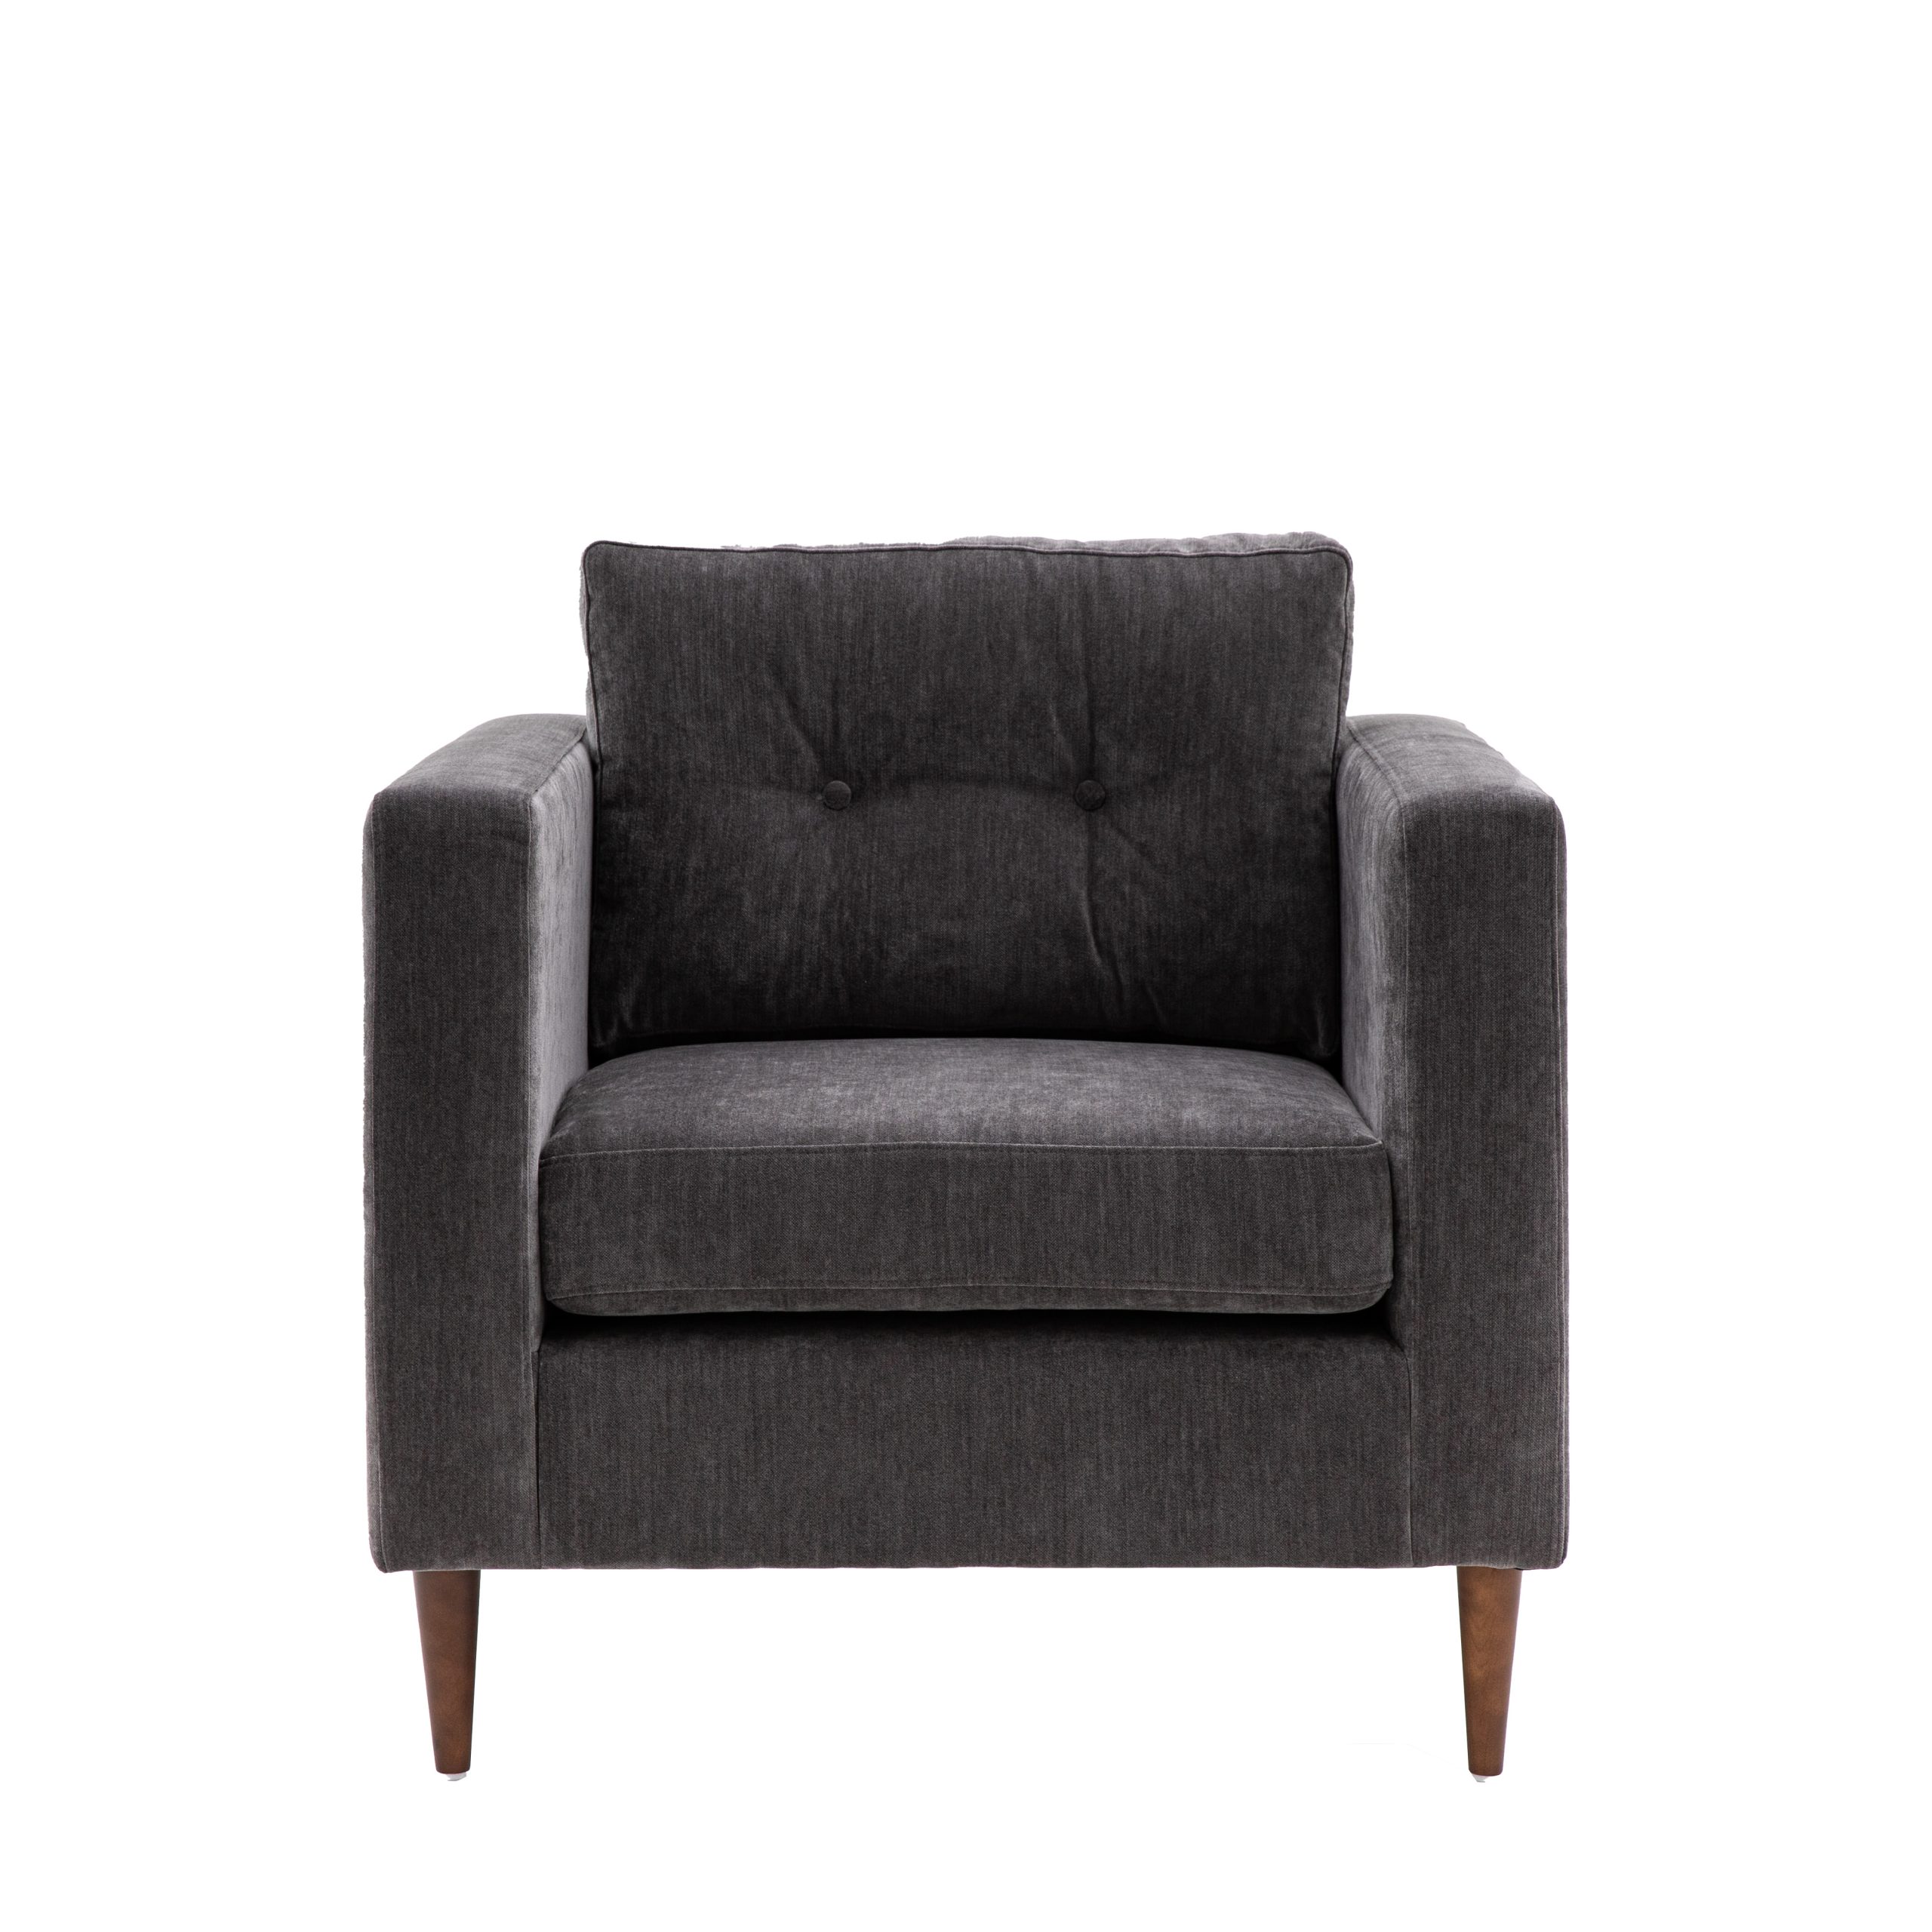 Gallery Direct Whitwell Armchair Charcoal